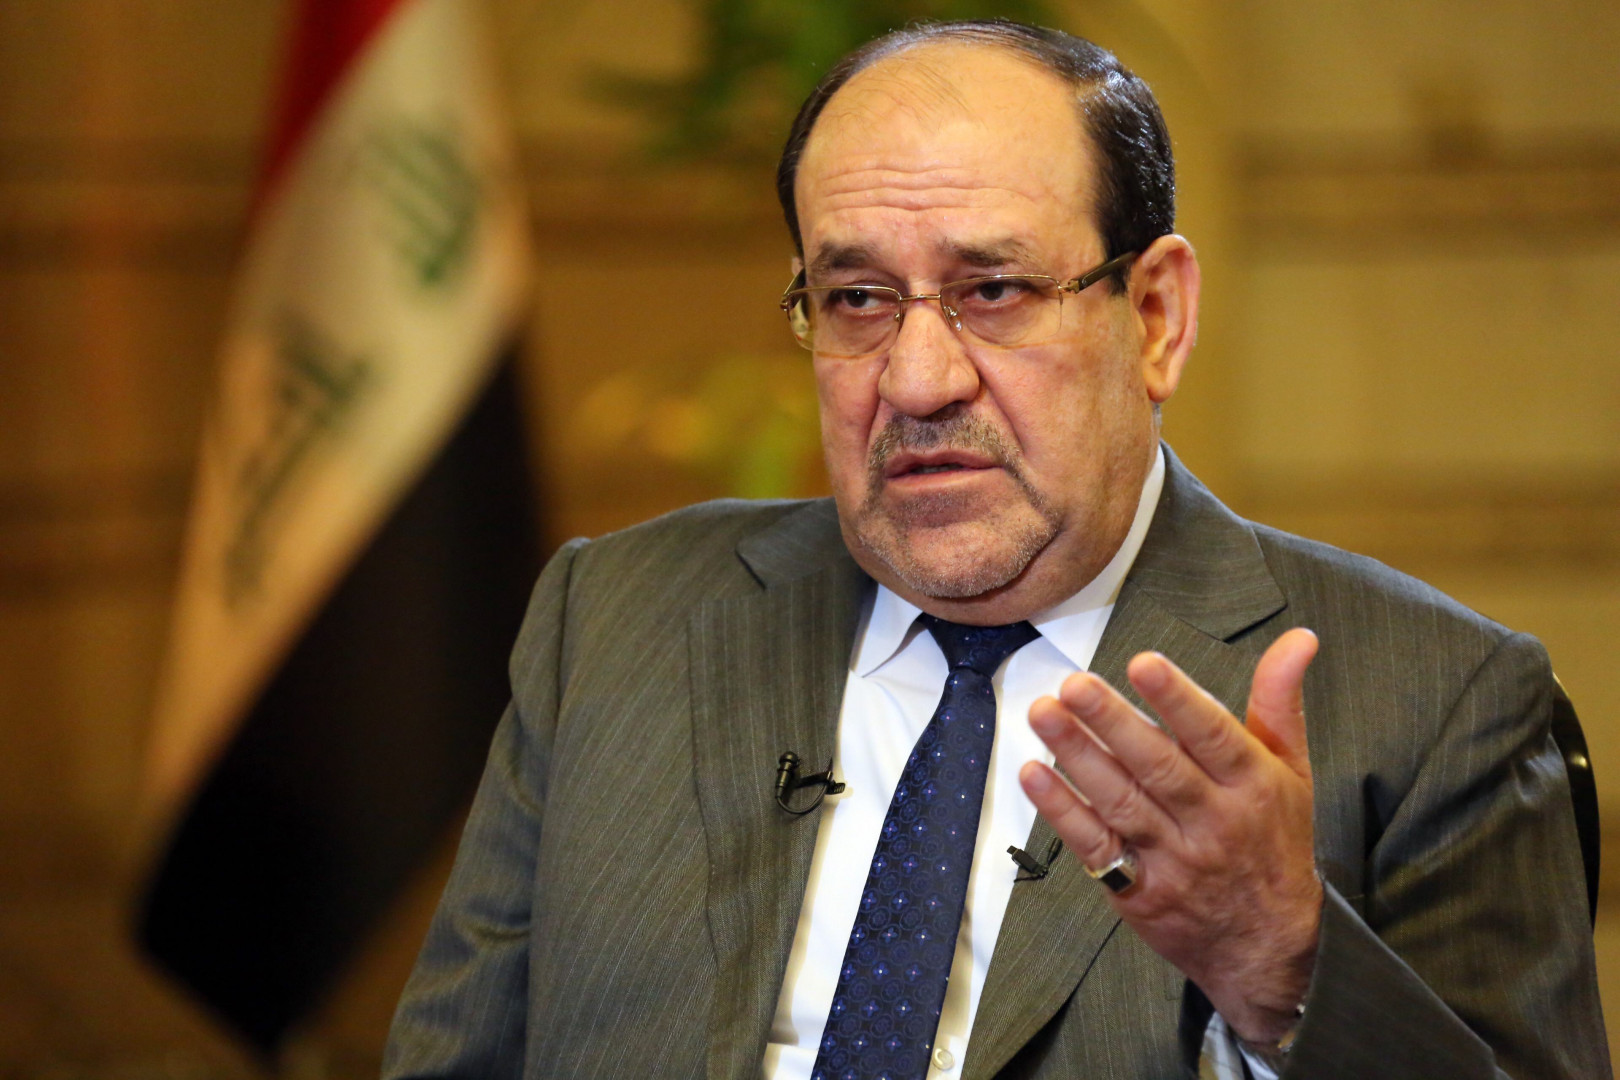 Al-Maliki warns against military aid to Israel amid ongoing conflict